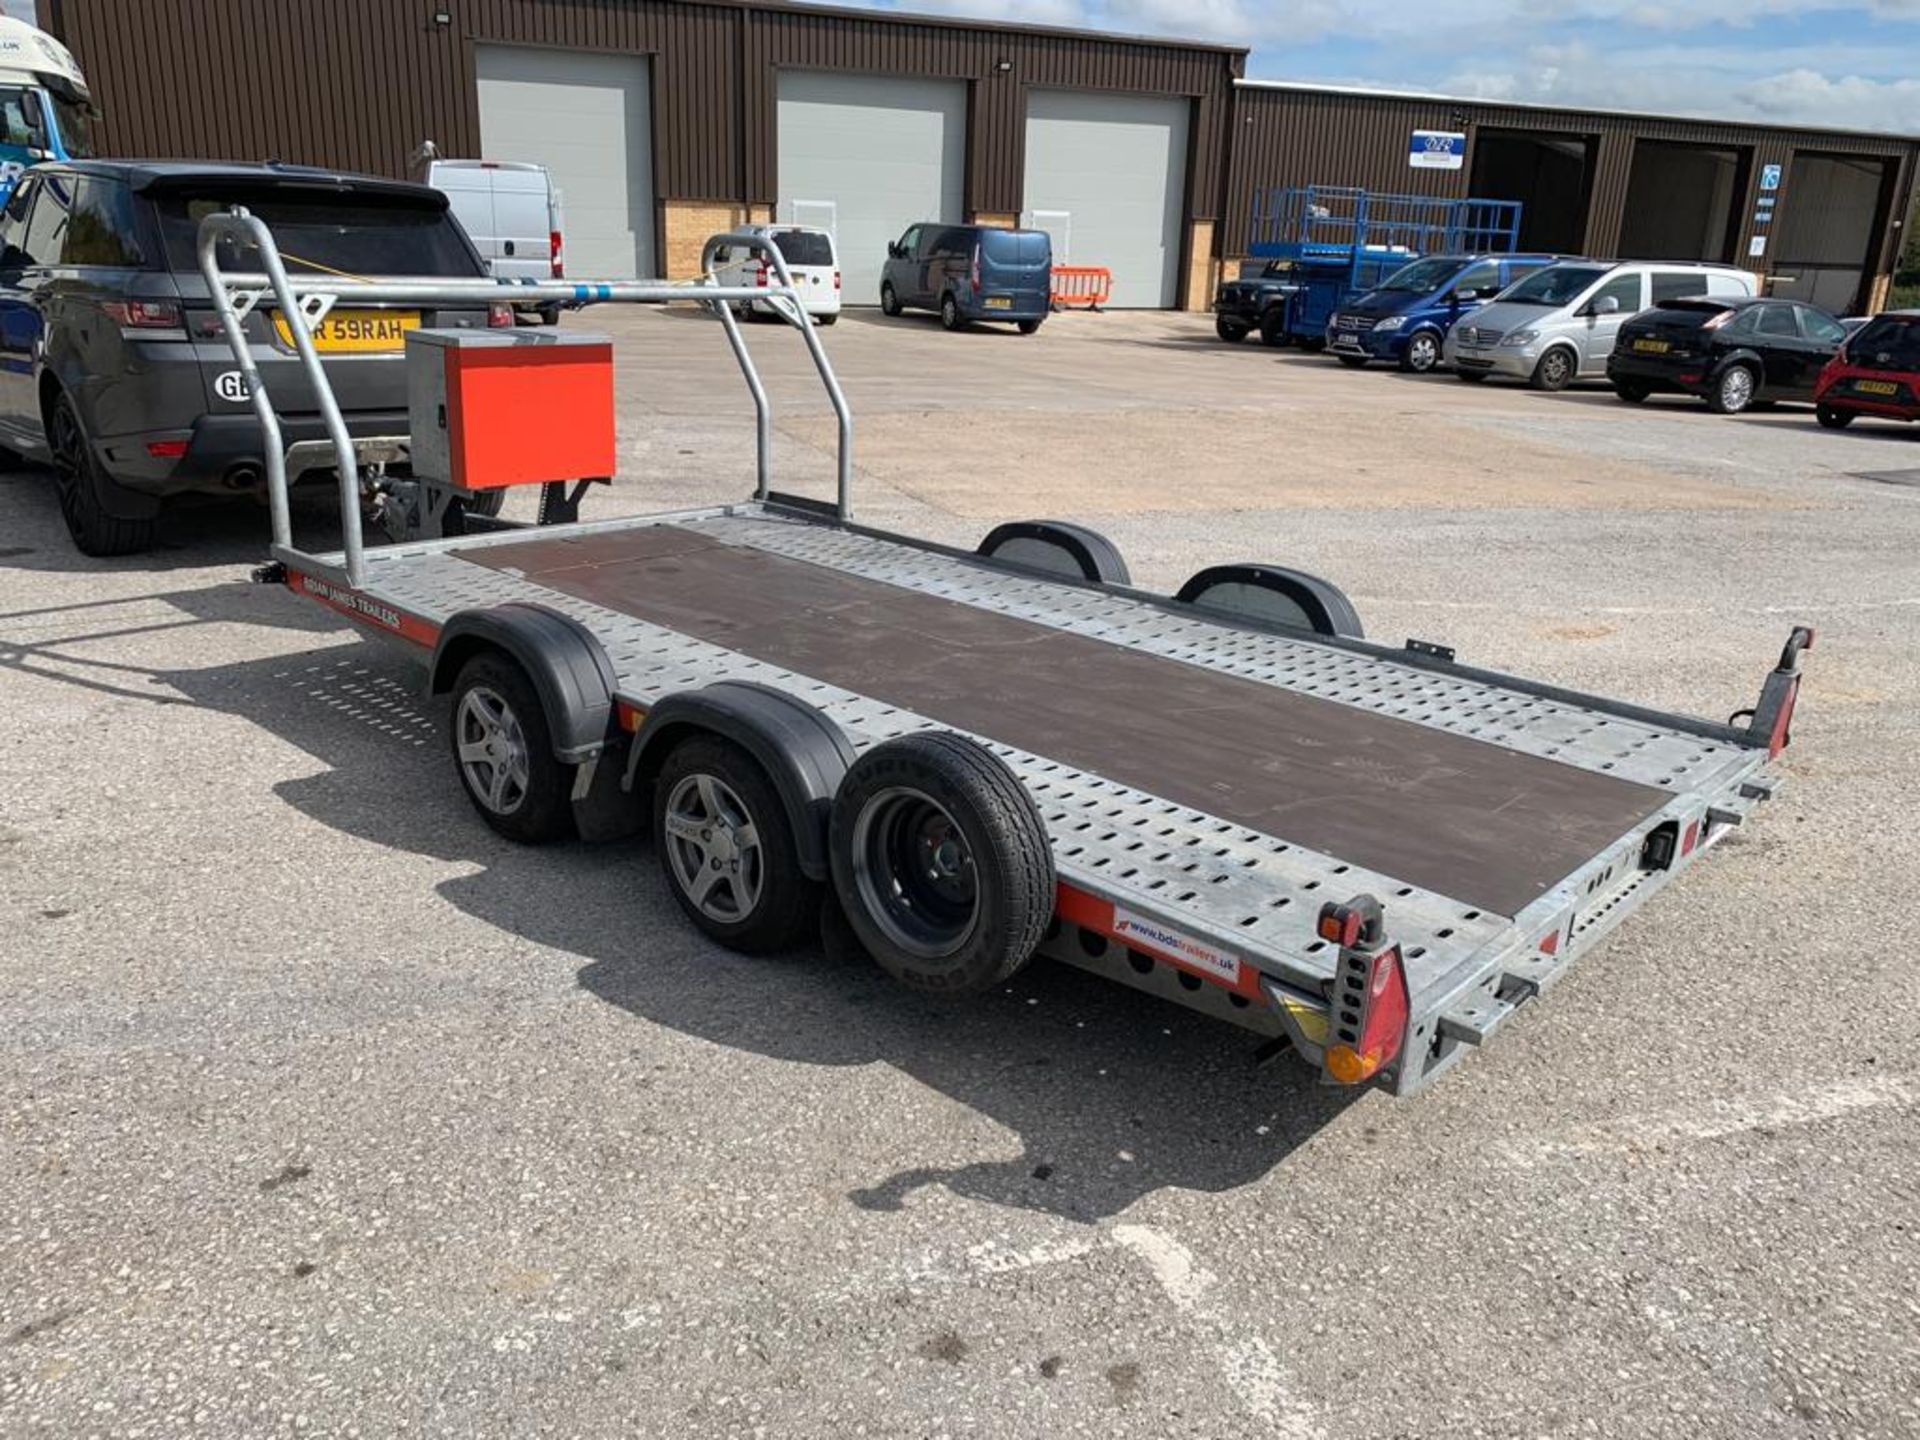 2018 BRIAN JAMES TRAILERS TWIN AXLE 2600KG VEHICLE TRAILER WITH WHEEL RACK & STORAGE *PLUS VAT* - Image 4 of 9